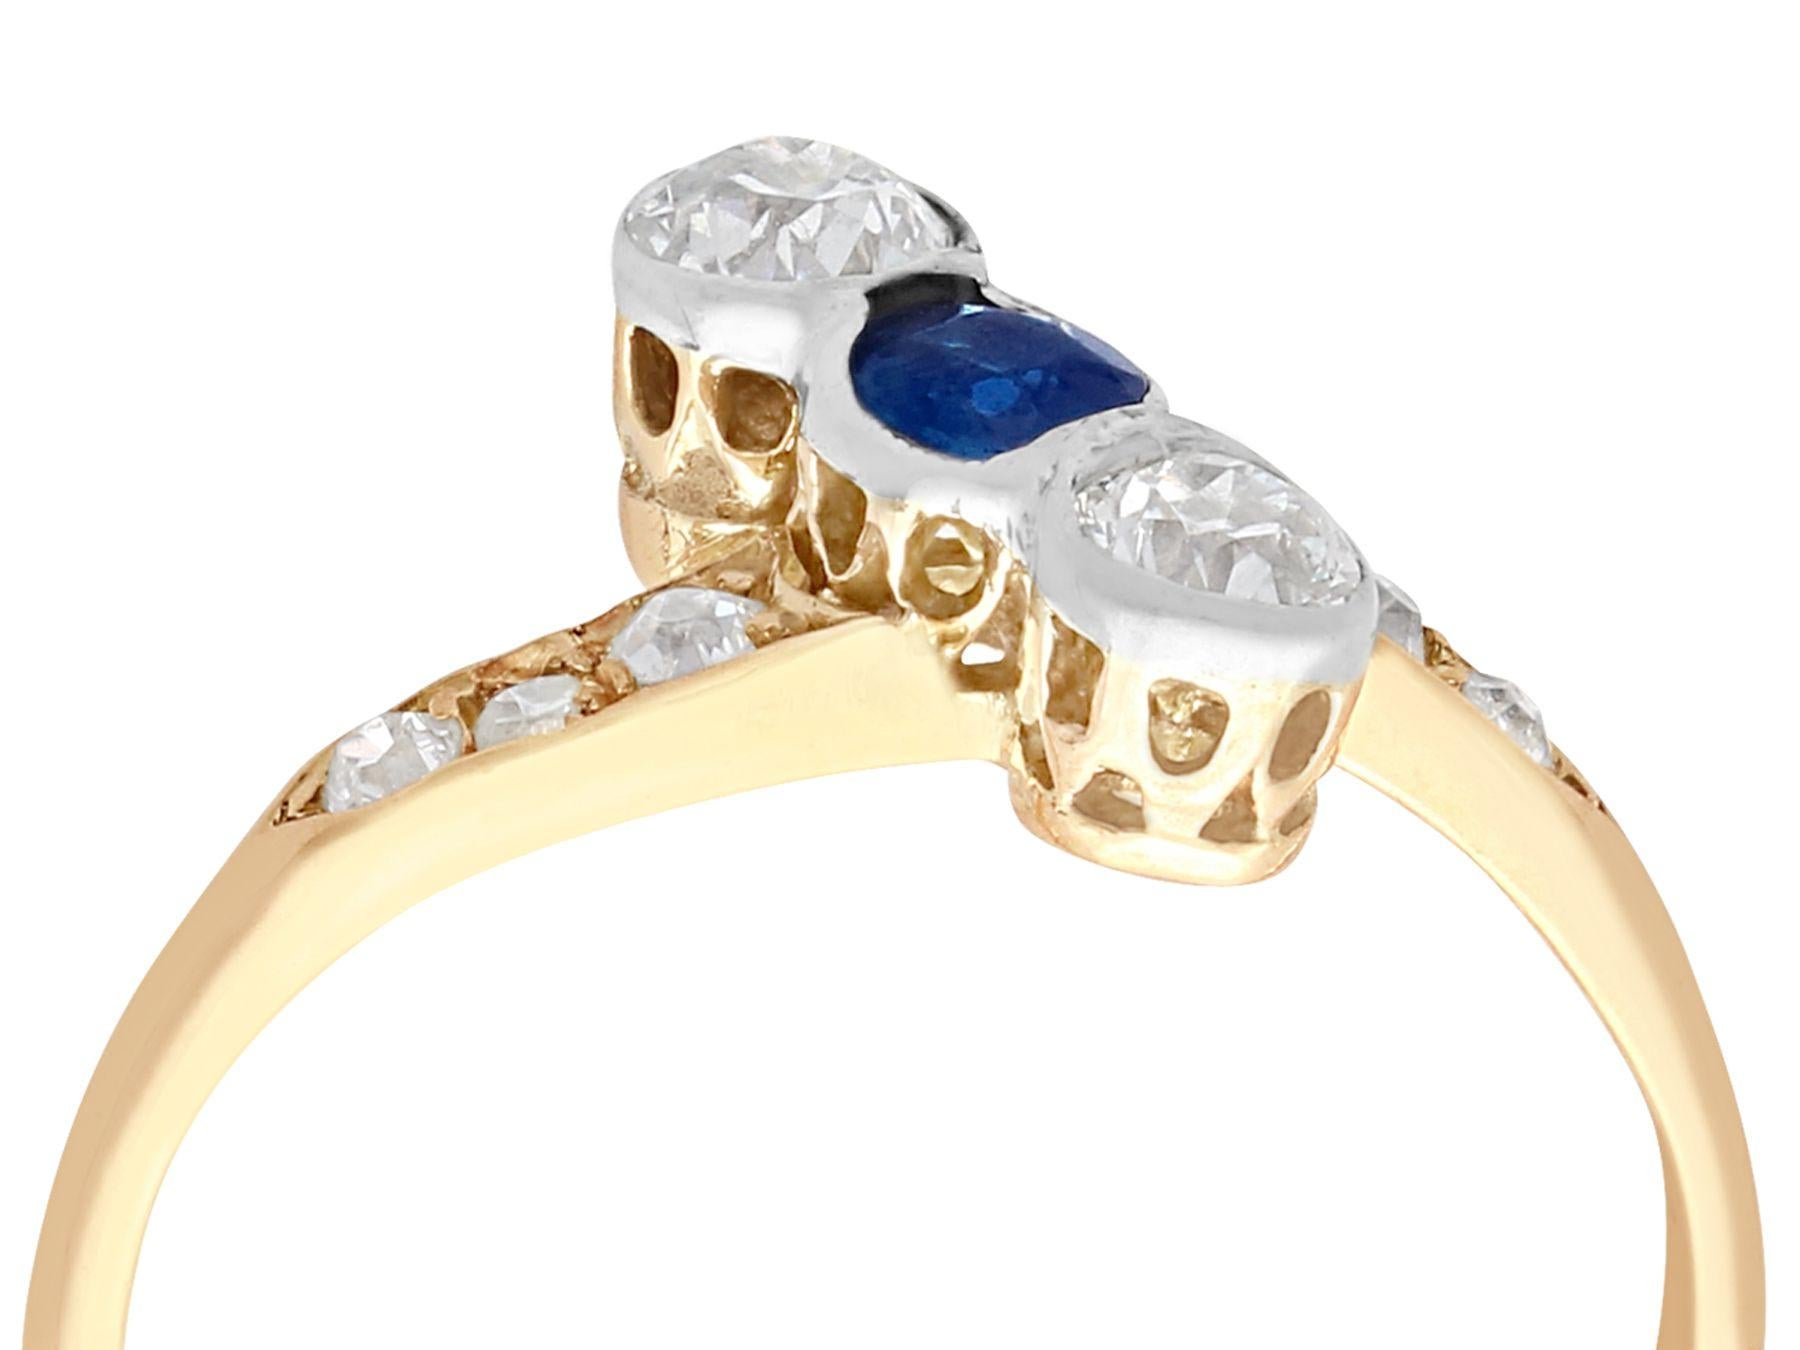 An impressive antique 0.22 carat sapphire and 0.62 carat diamond, 14k yellow gold and 14k white gold set cocktail ring; part of our diverse antique jewelry collections.

This fine and impressive three stone antique ring has been crafted in 14k